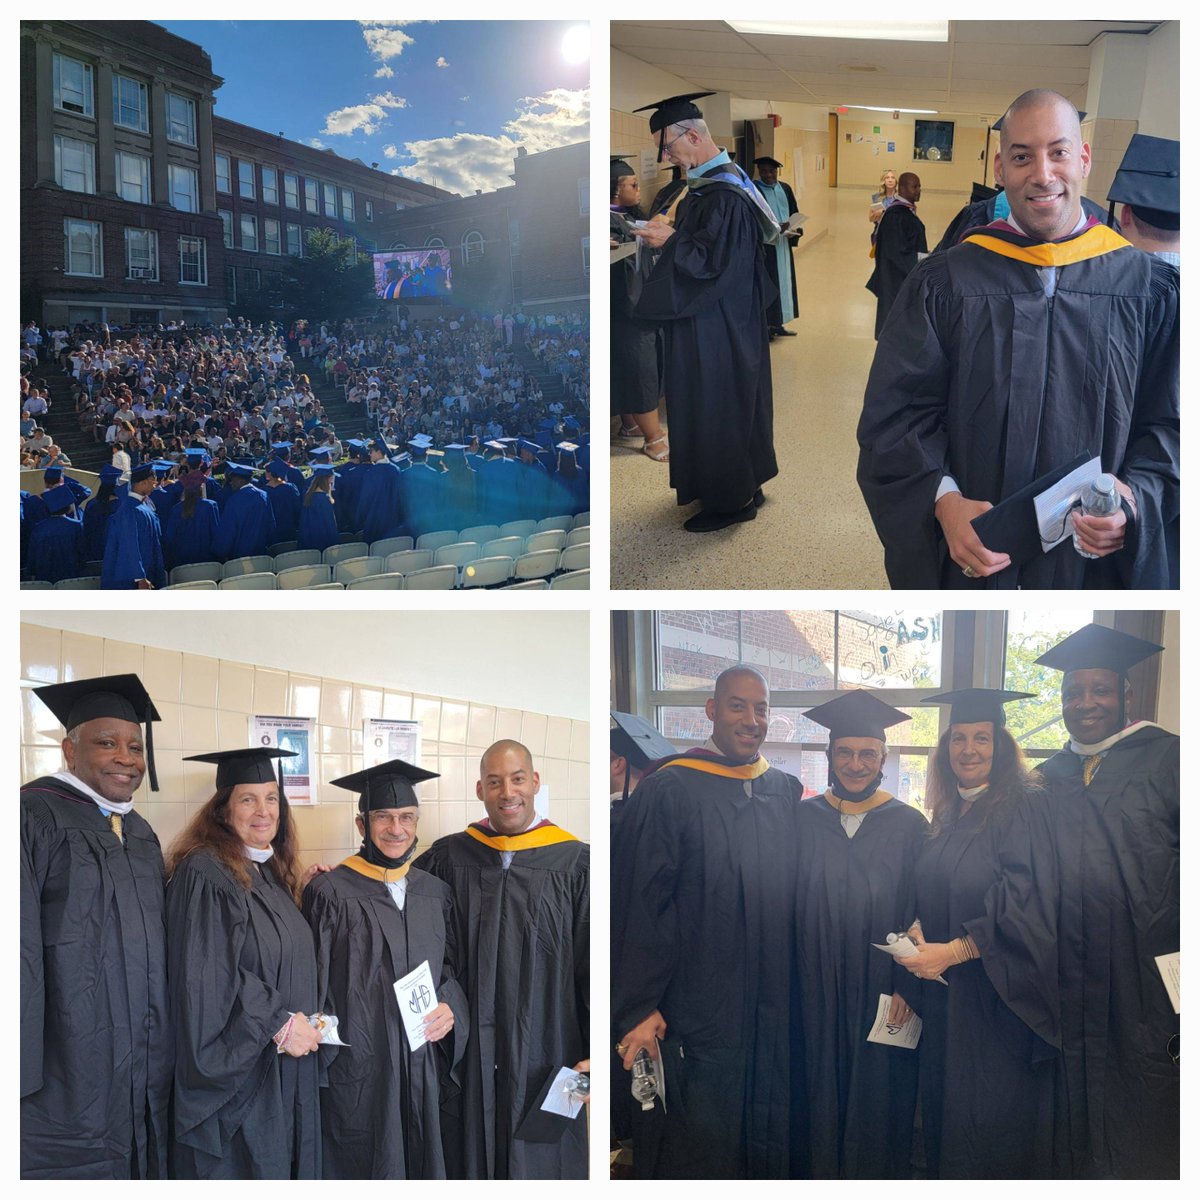 Another Montclair HS graduation (155) begins! Congratulations to all the graduates, their families, and educators! @MontclairNJGov @MontclairTimes @montclairlocal